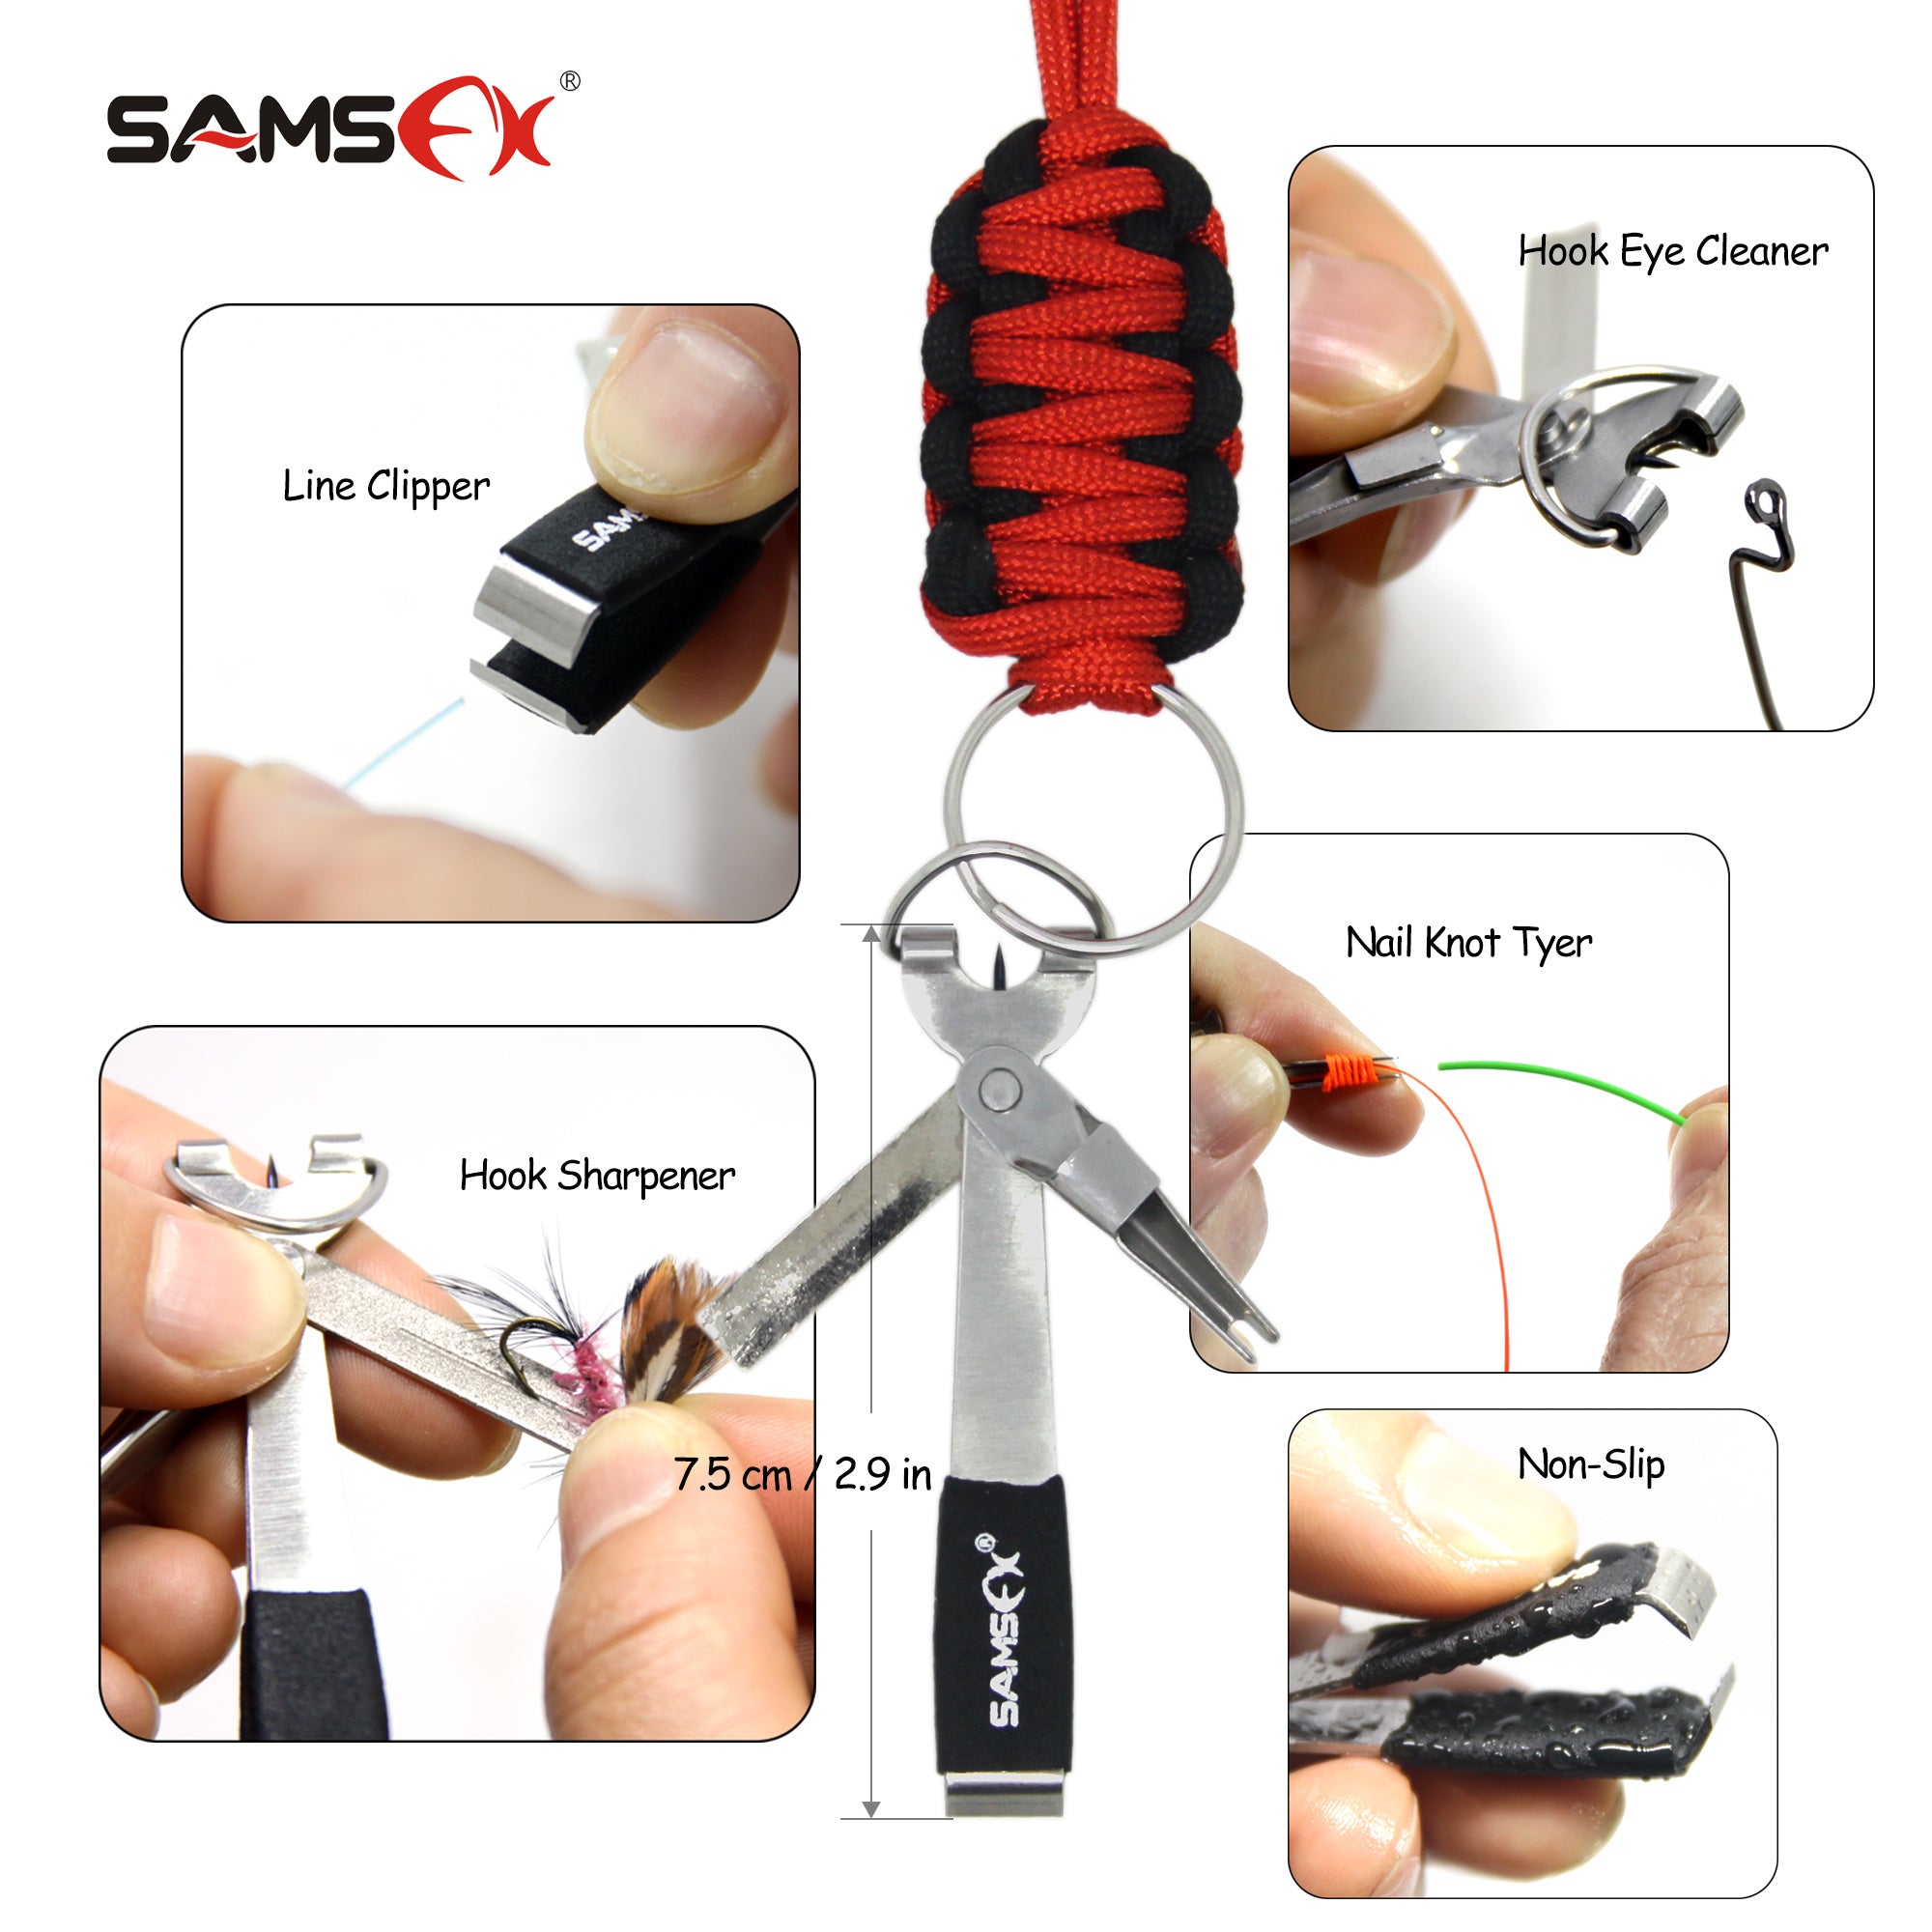  Lfemro 4 in 1 Stainless Steel Fly Fishing Tool Quick Knot  Tying Tool Includes Fishing Line Clipper Quick Knot Knotter Hook Sharper  Hook Eye Needle : Sports & Outdoors